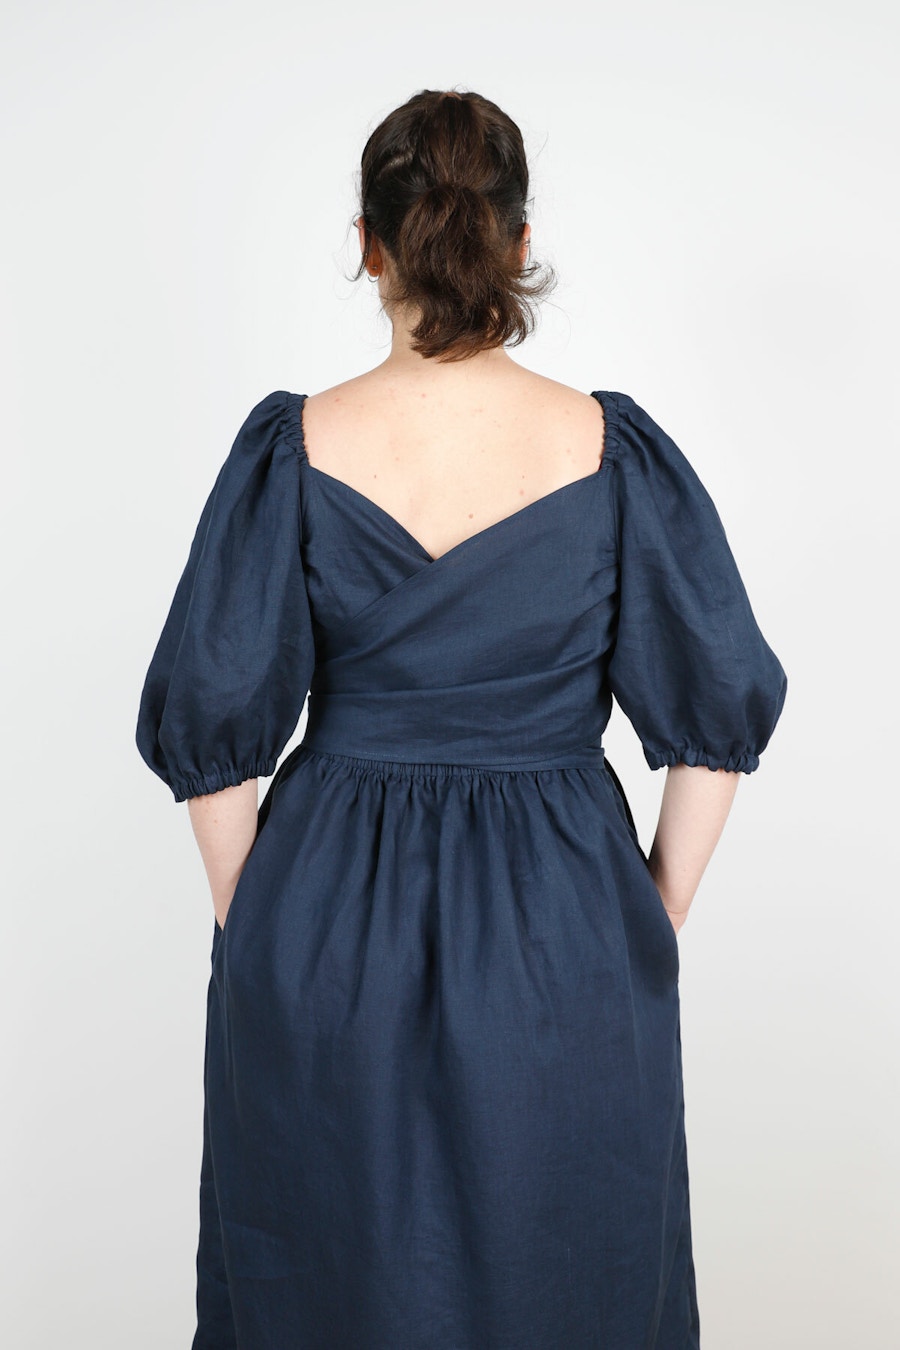 Back Crossover Papercut Patterns Estella Dress Navy Vintage Finish Linen By The Fabric Store